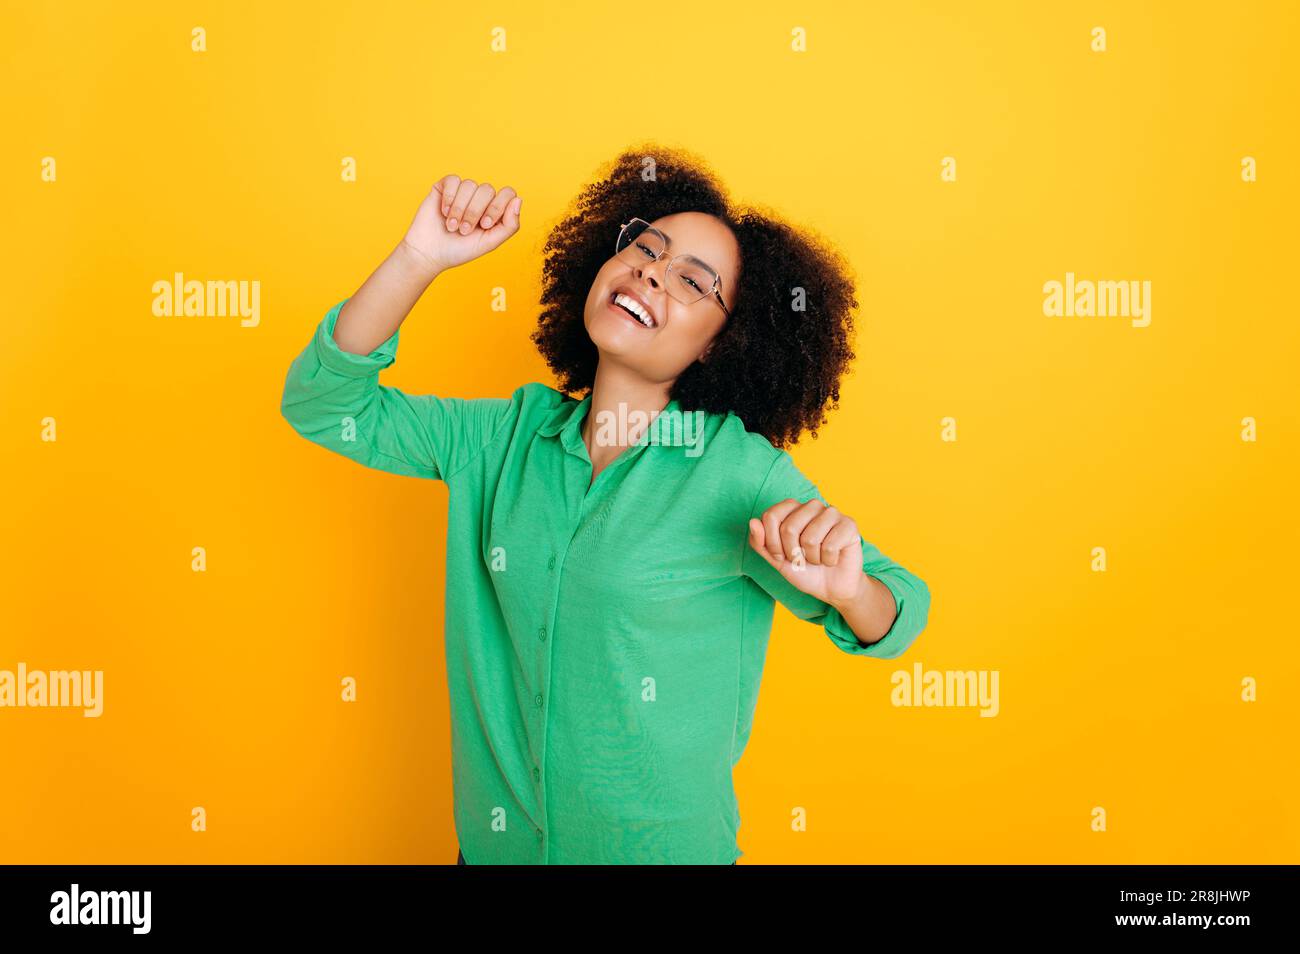 Success, ecstatic. Happy african american or brazilian curly woman with glasses, stand on isolated yellow background, gesturing with fists, laughing, rejoicing, dancing, experiencing joyful emotions Stock Photo